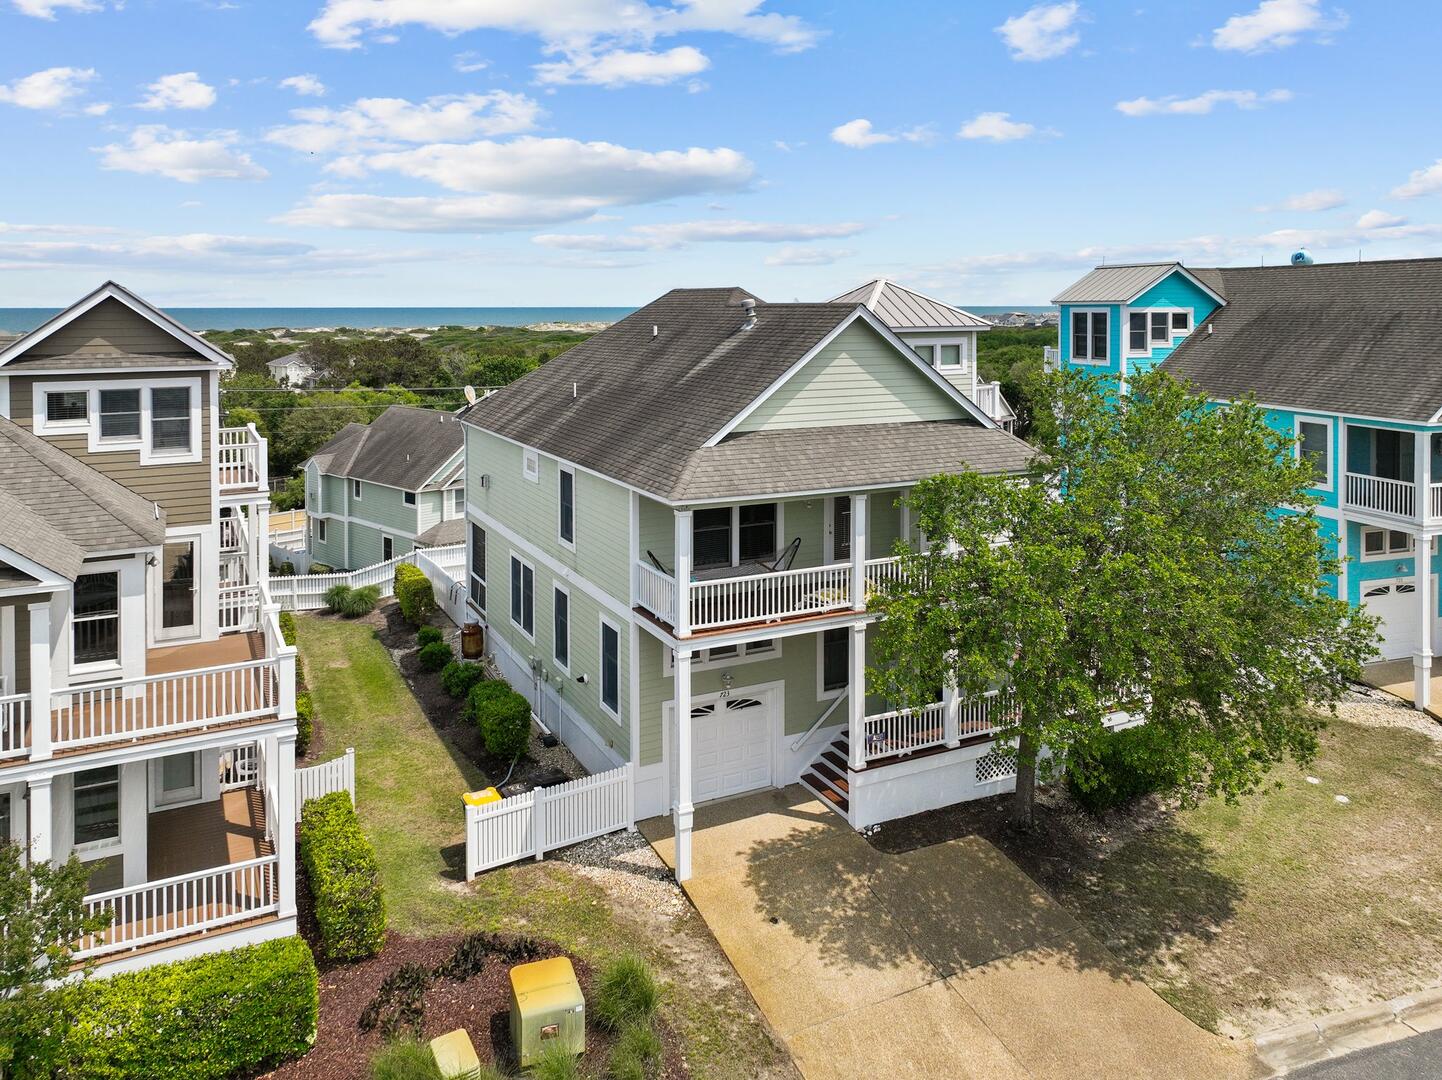 K9104 - Why Knot 4 bedroom home at The Currituck Club